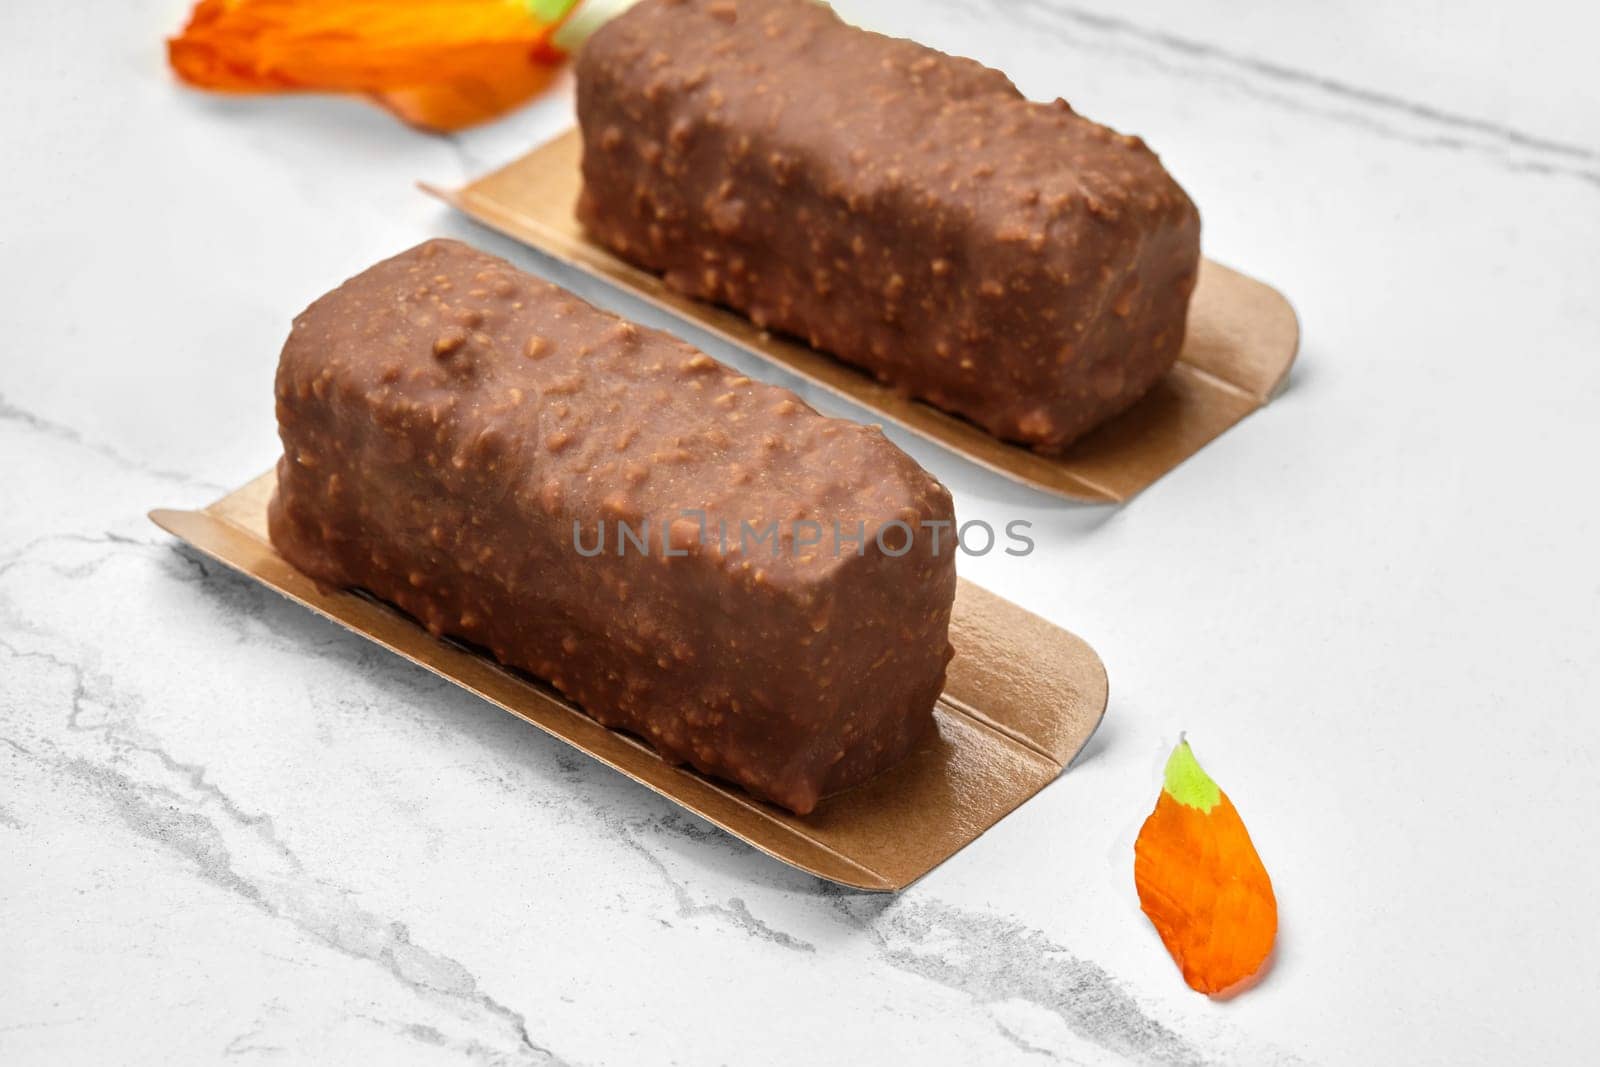 Milk chocolate-glazed cottage cheese bars sprinkled with nuts, presented on golden cardboards with marble background and orange flower petals